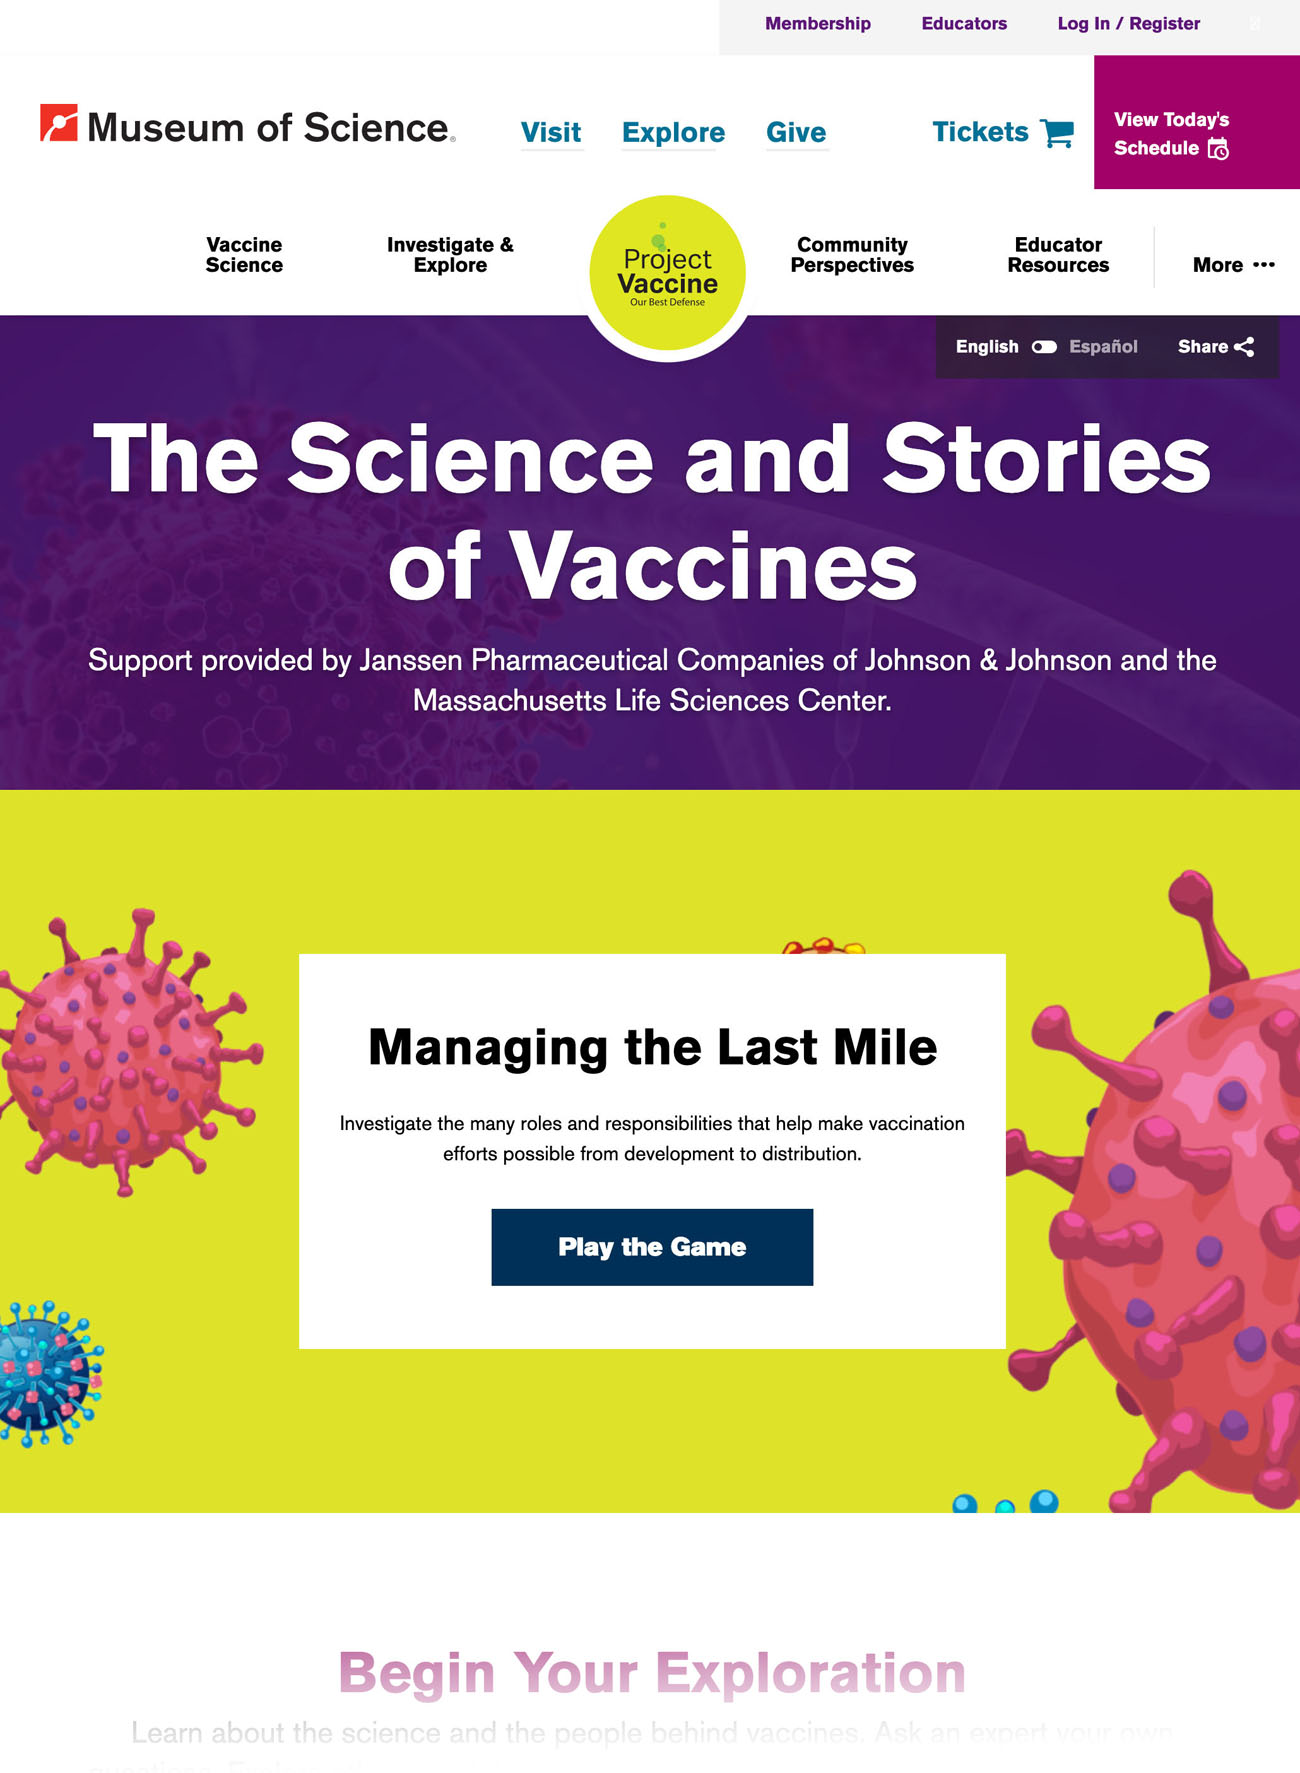 The Project Vaccine homepage